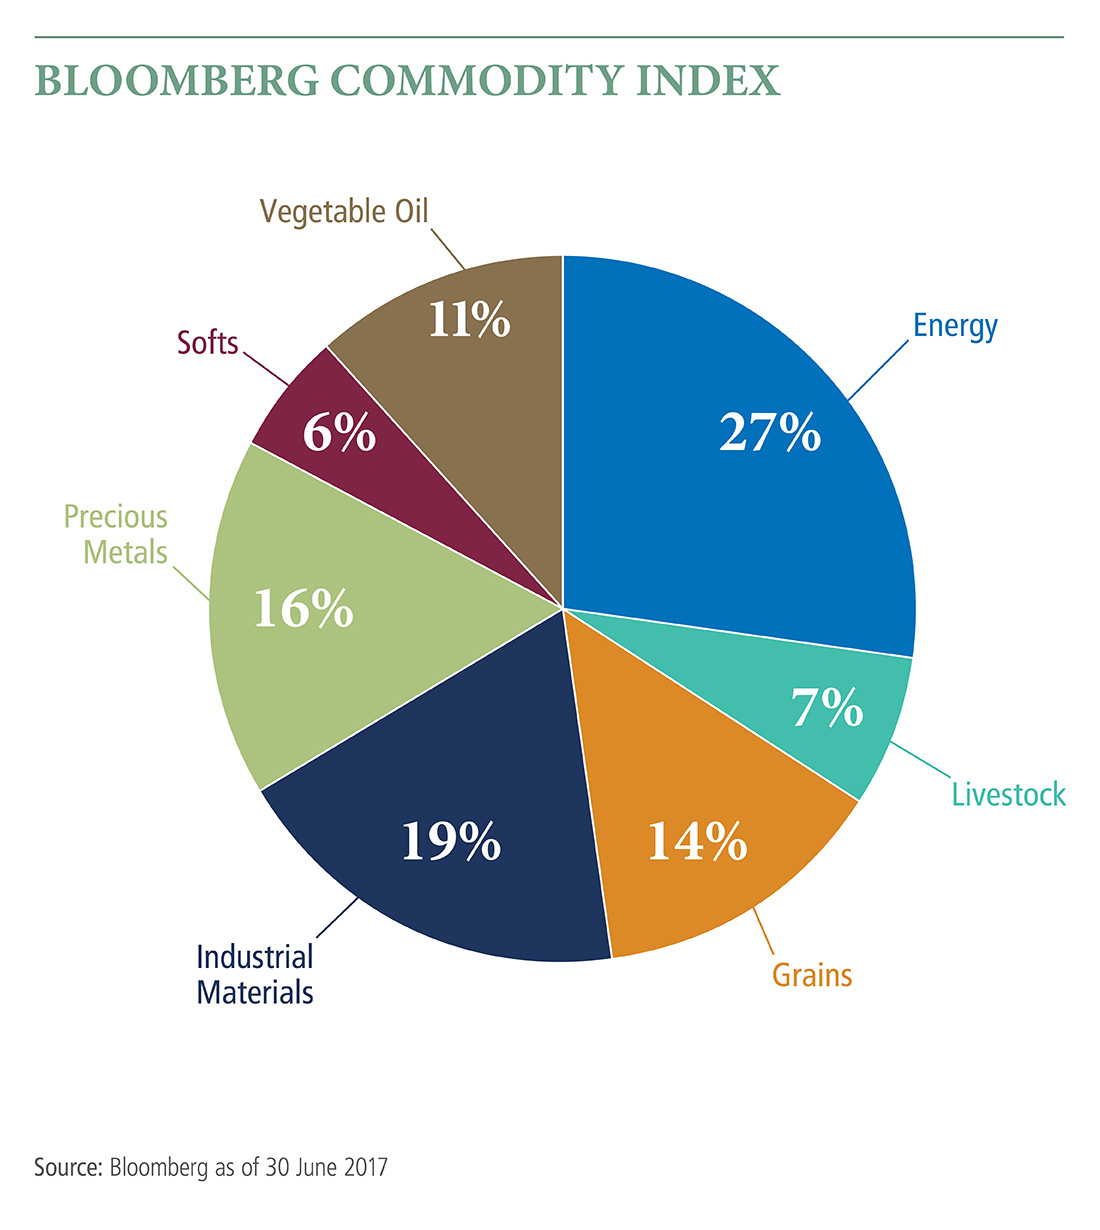 The pie chart provides a breakdown of commodities from the Bloomberg Commodity Index: energy is the largest section at 27%, followed by industrial materials at 19%, precious metals at 16%, grains at 14%, vegetable oil at 11%, livestock at 7% and softs at 6%.